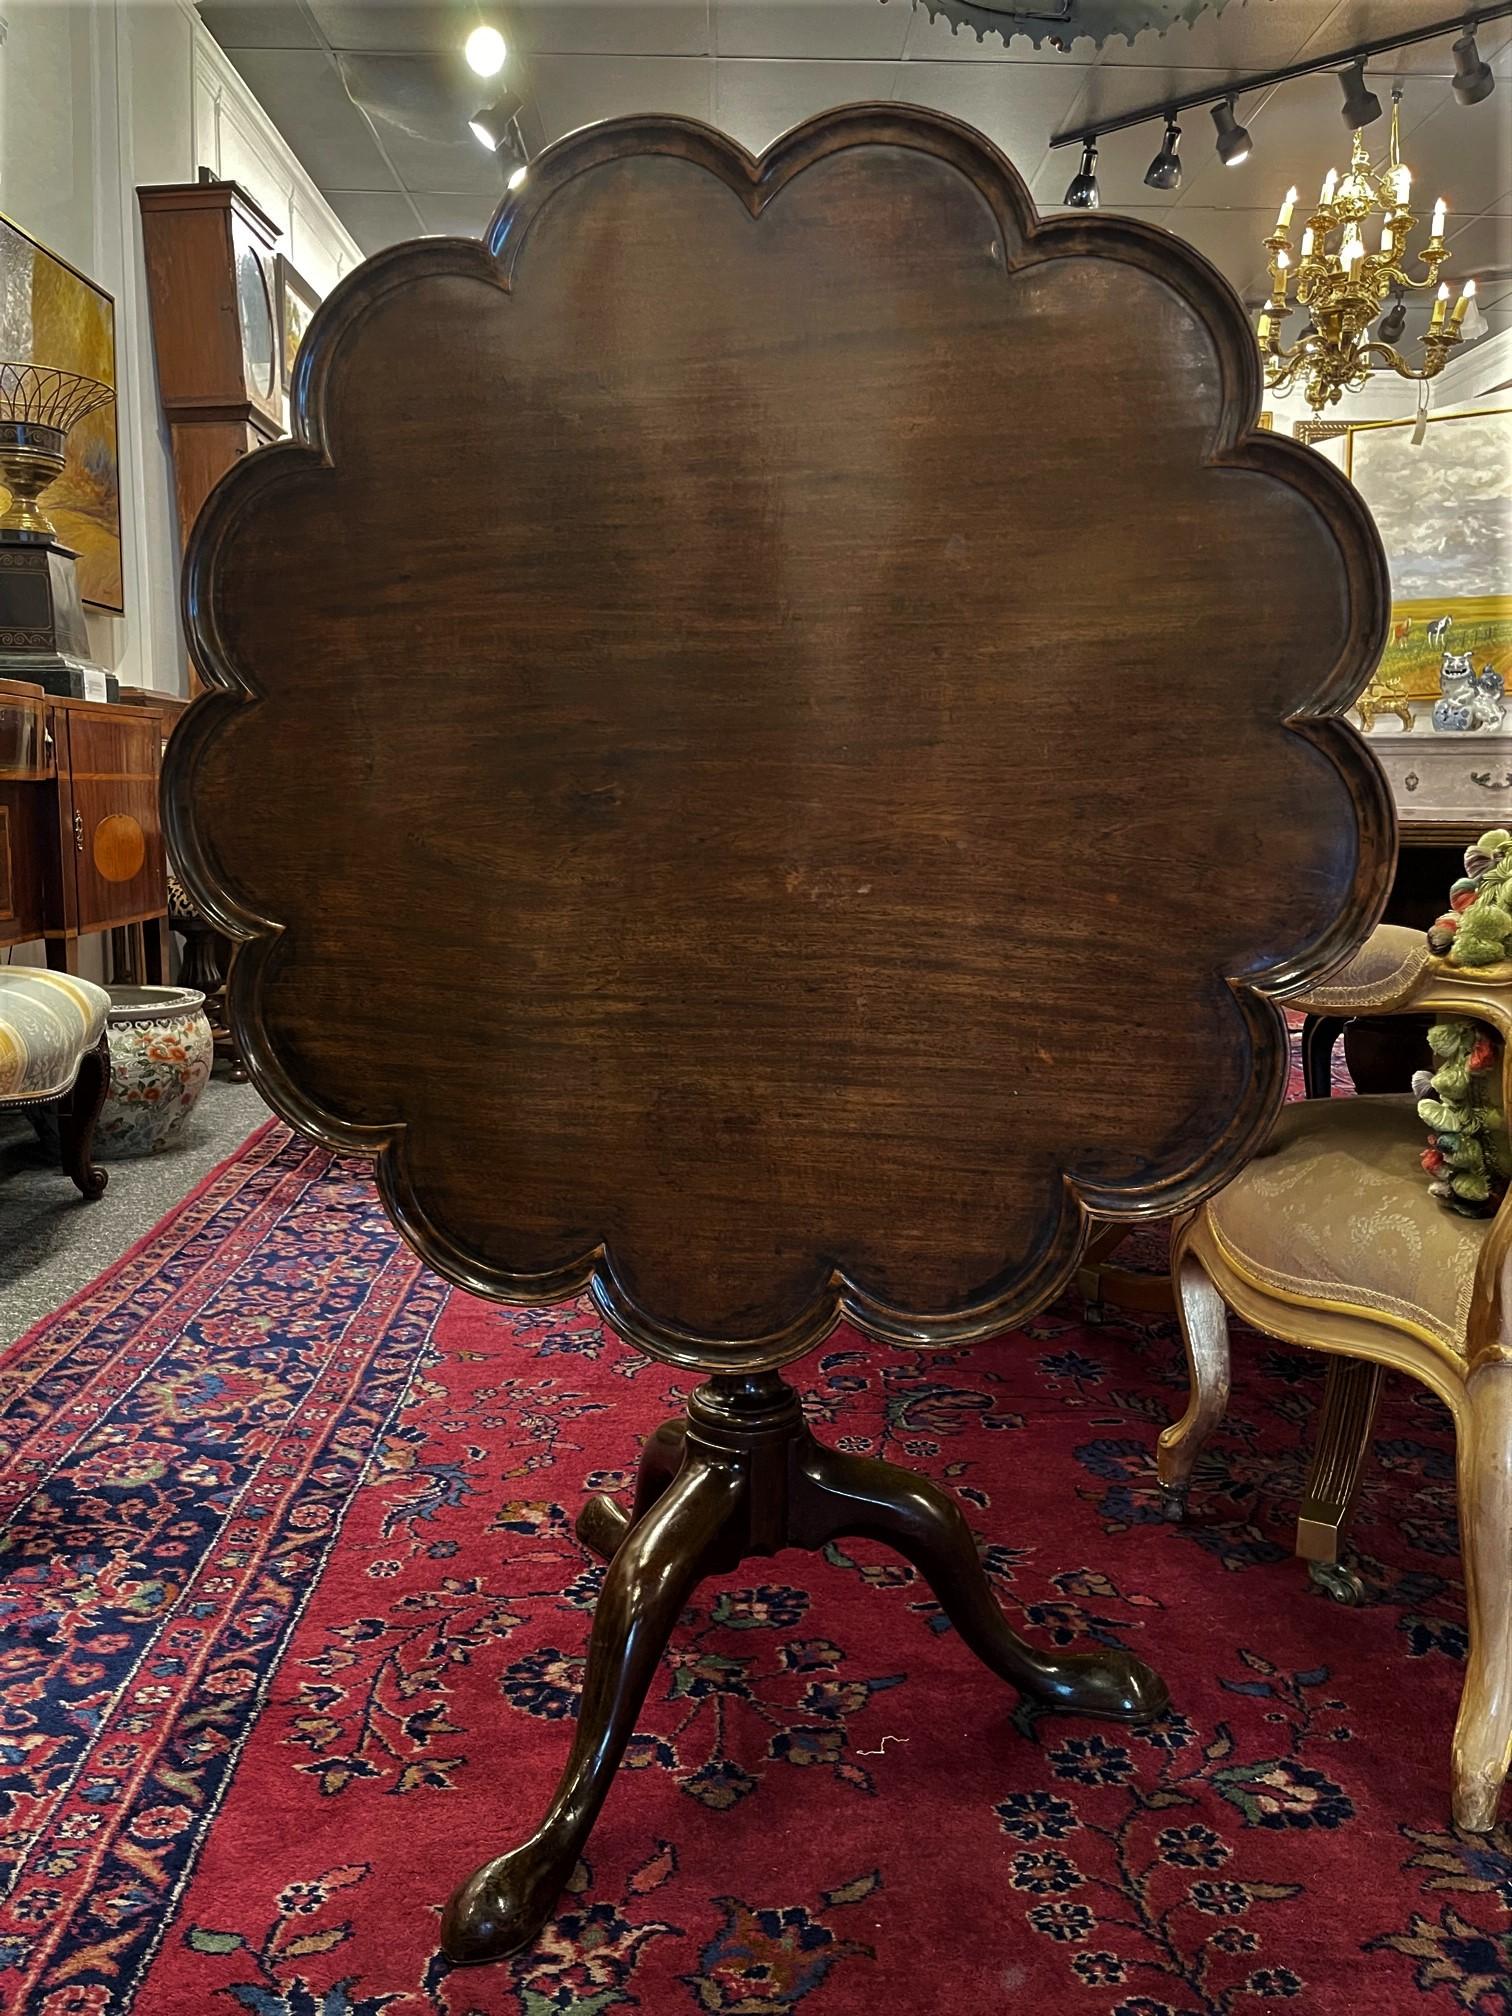 George III style mahogany tilt top or tripod scalloped edge and bird cage table, 19th century.